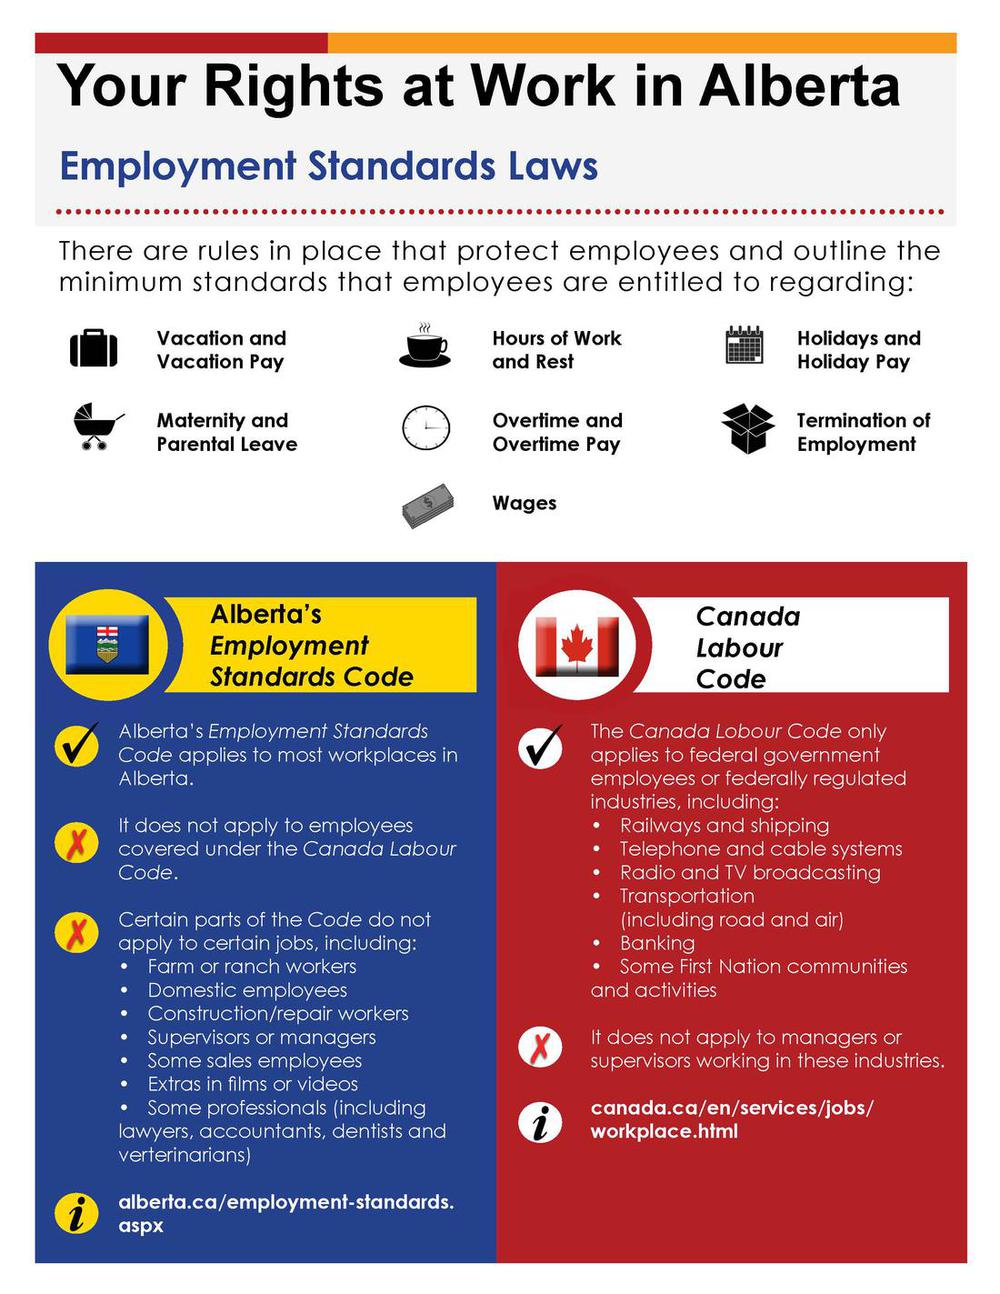 Your Rights at Work Employment Standards Law (Infographic) CPLEA.CA